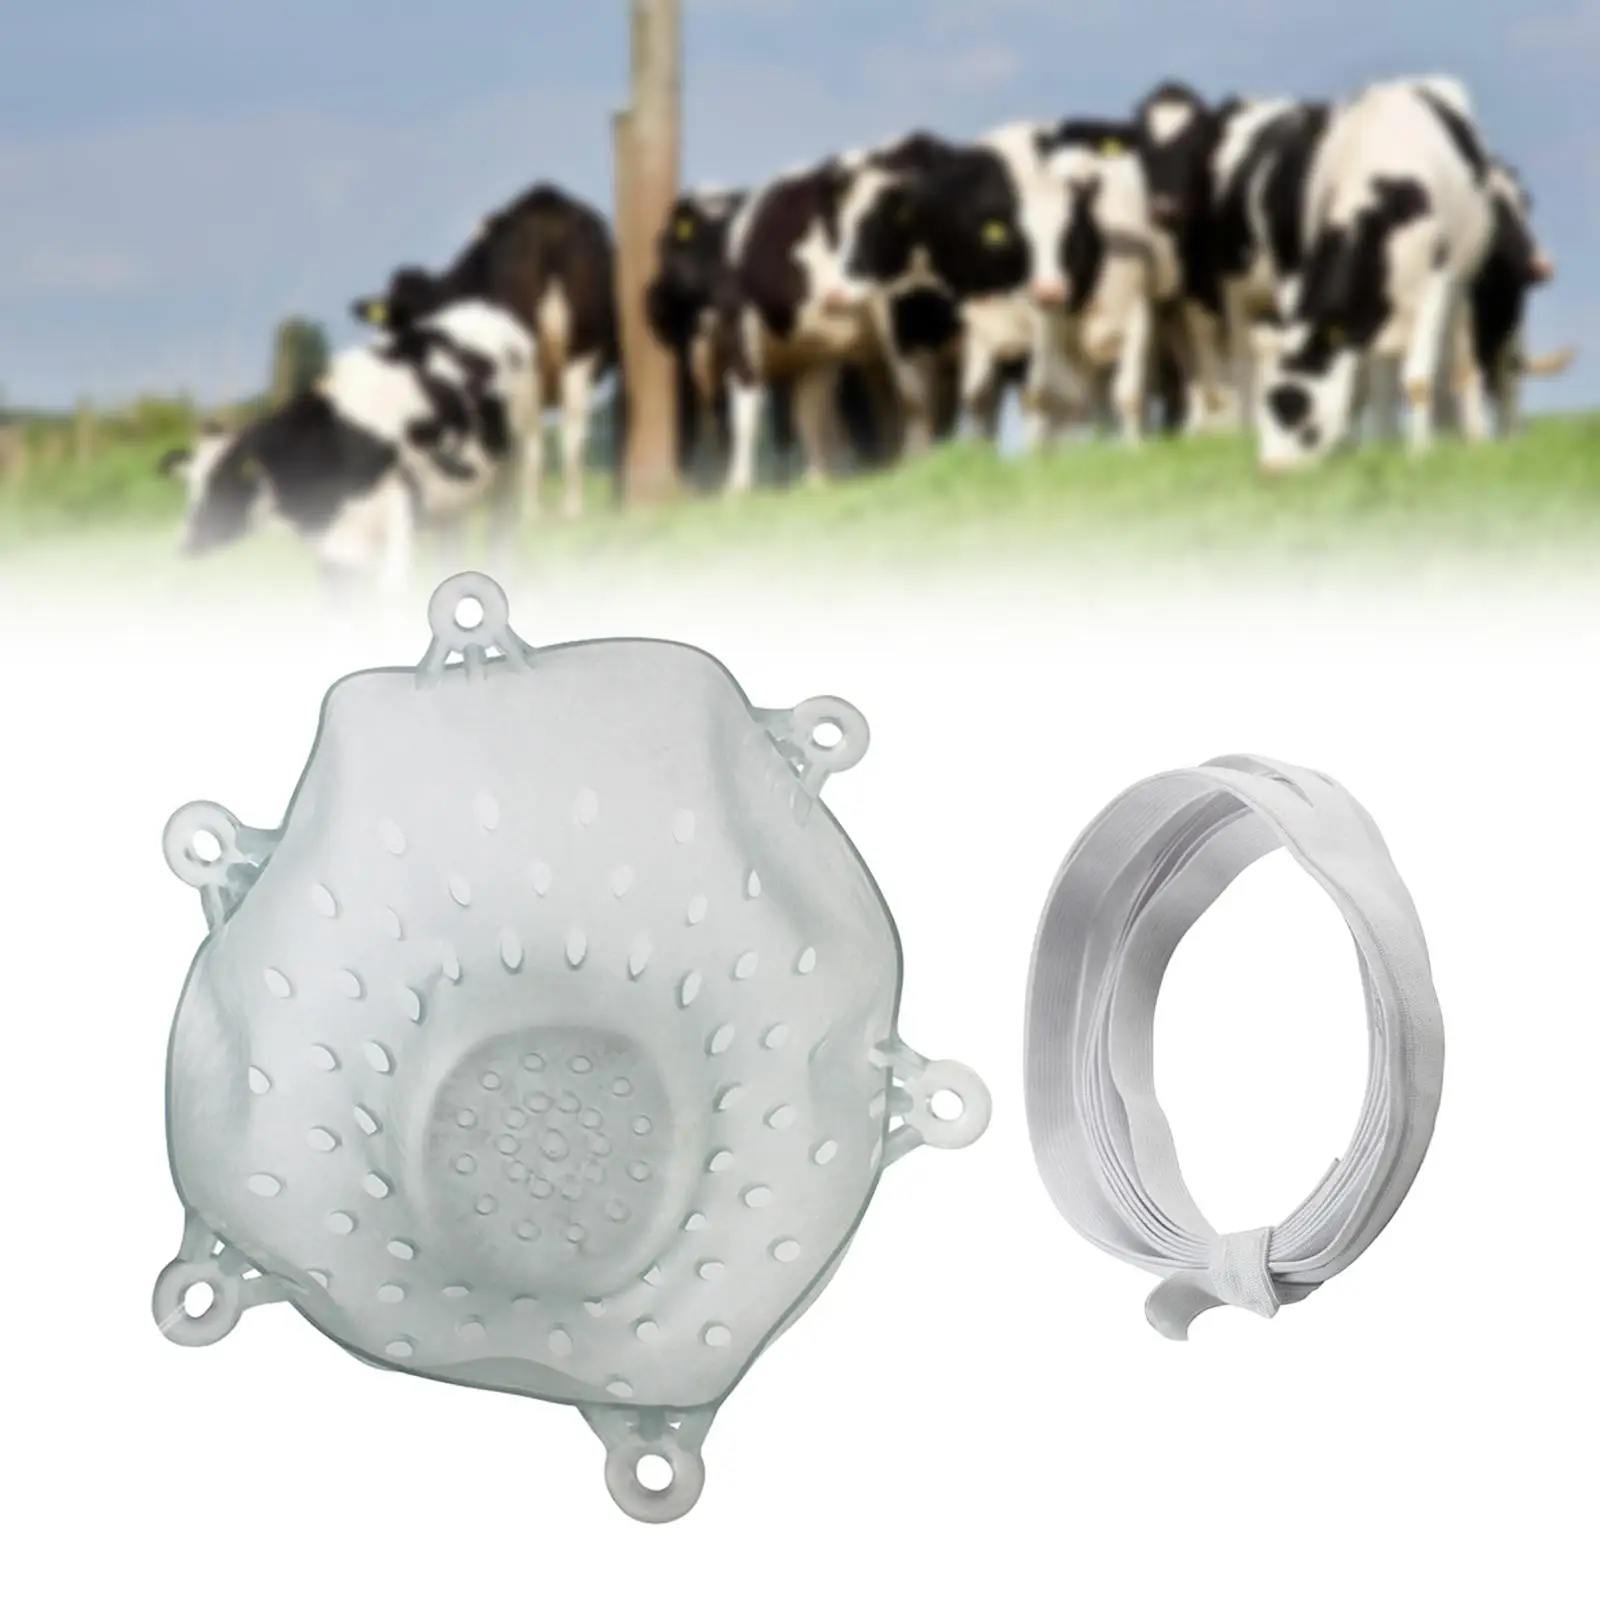 Cattle Weaning Tool Durable Livestock Farming Cow Bra Feeding Watering Supplies Livestock Silicone Weaner for Cow Cattle Bovine